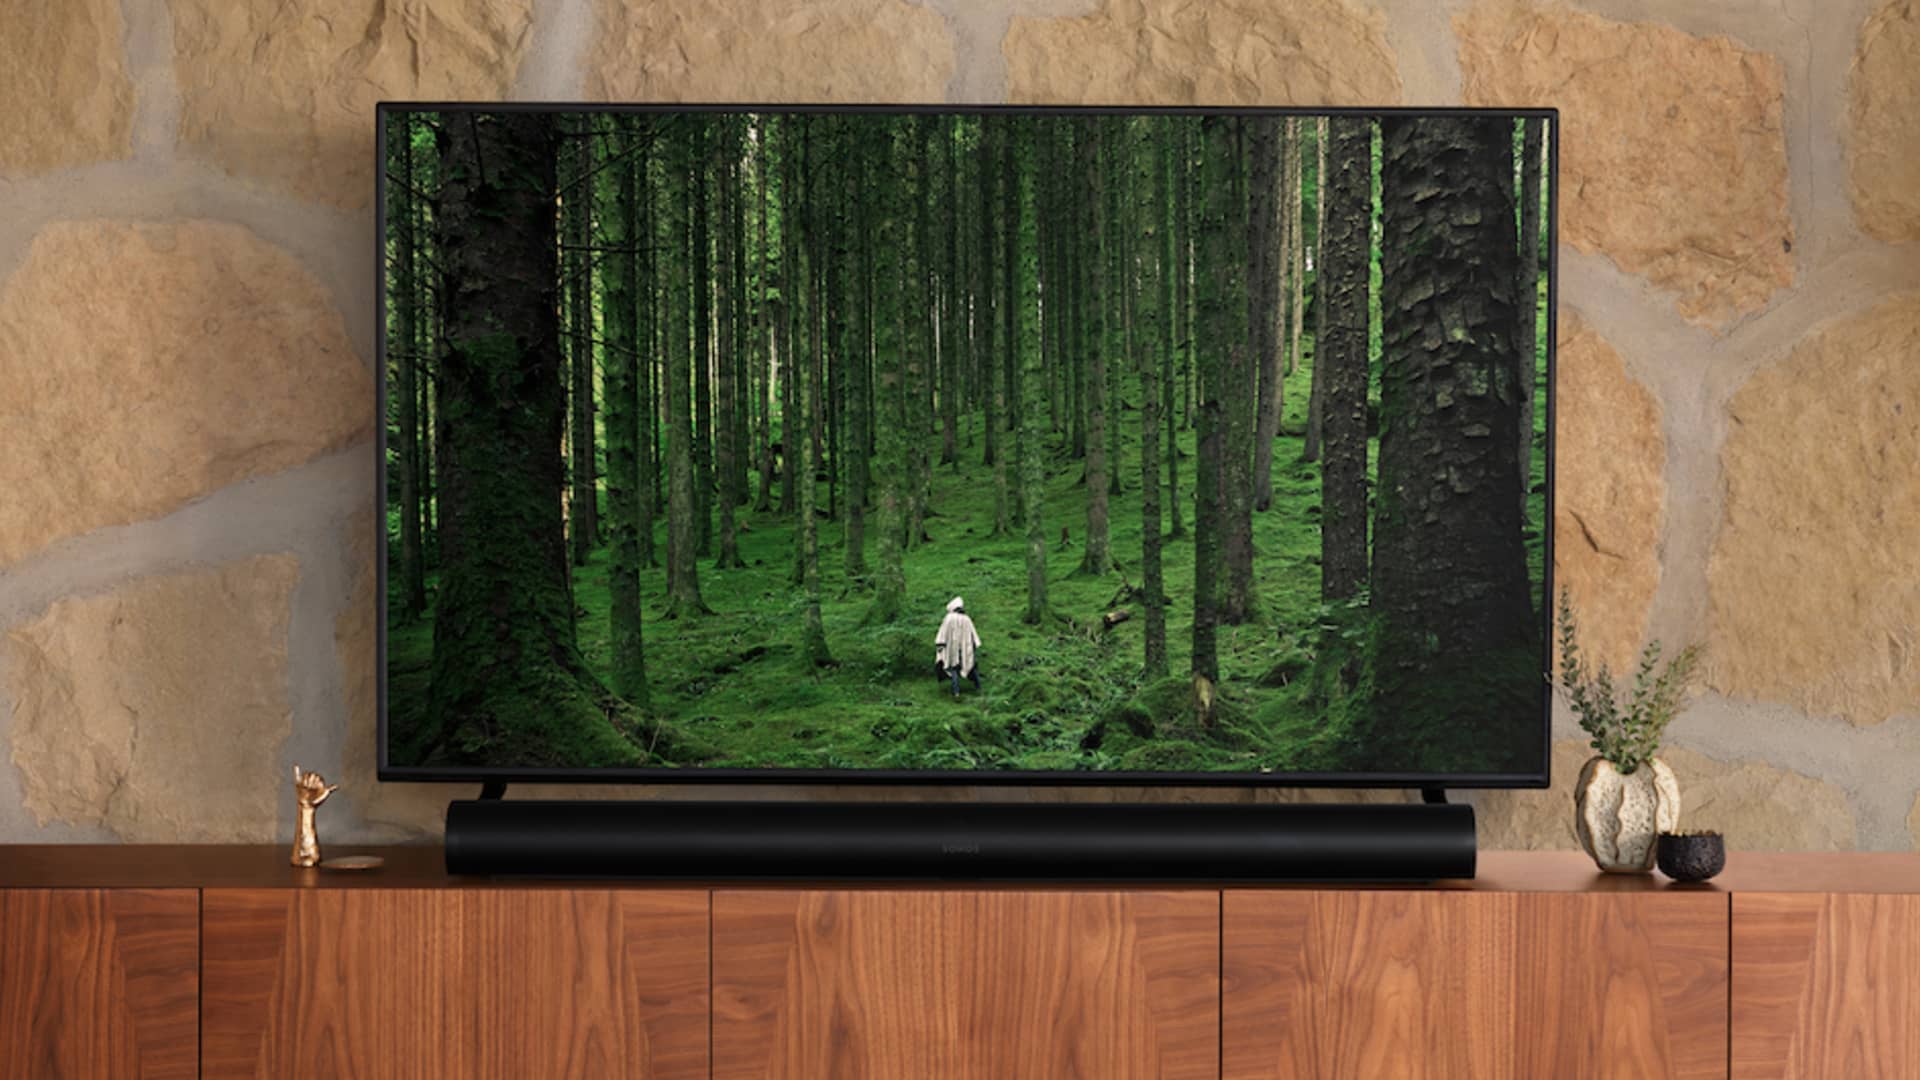 Here's what you need to know before you shop for a new TV on Black Friday